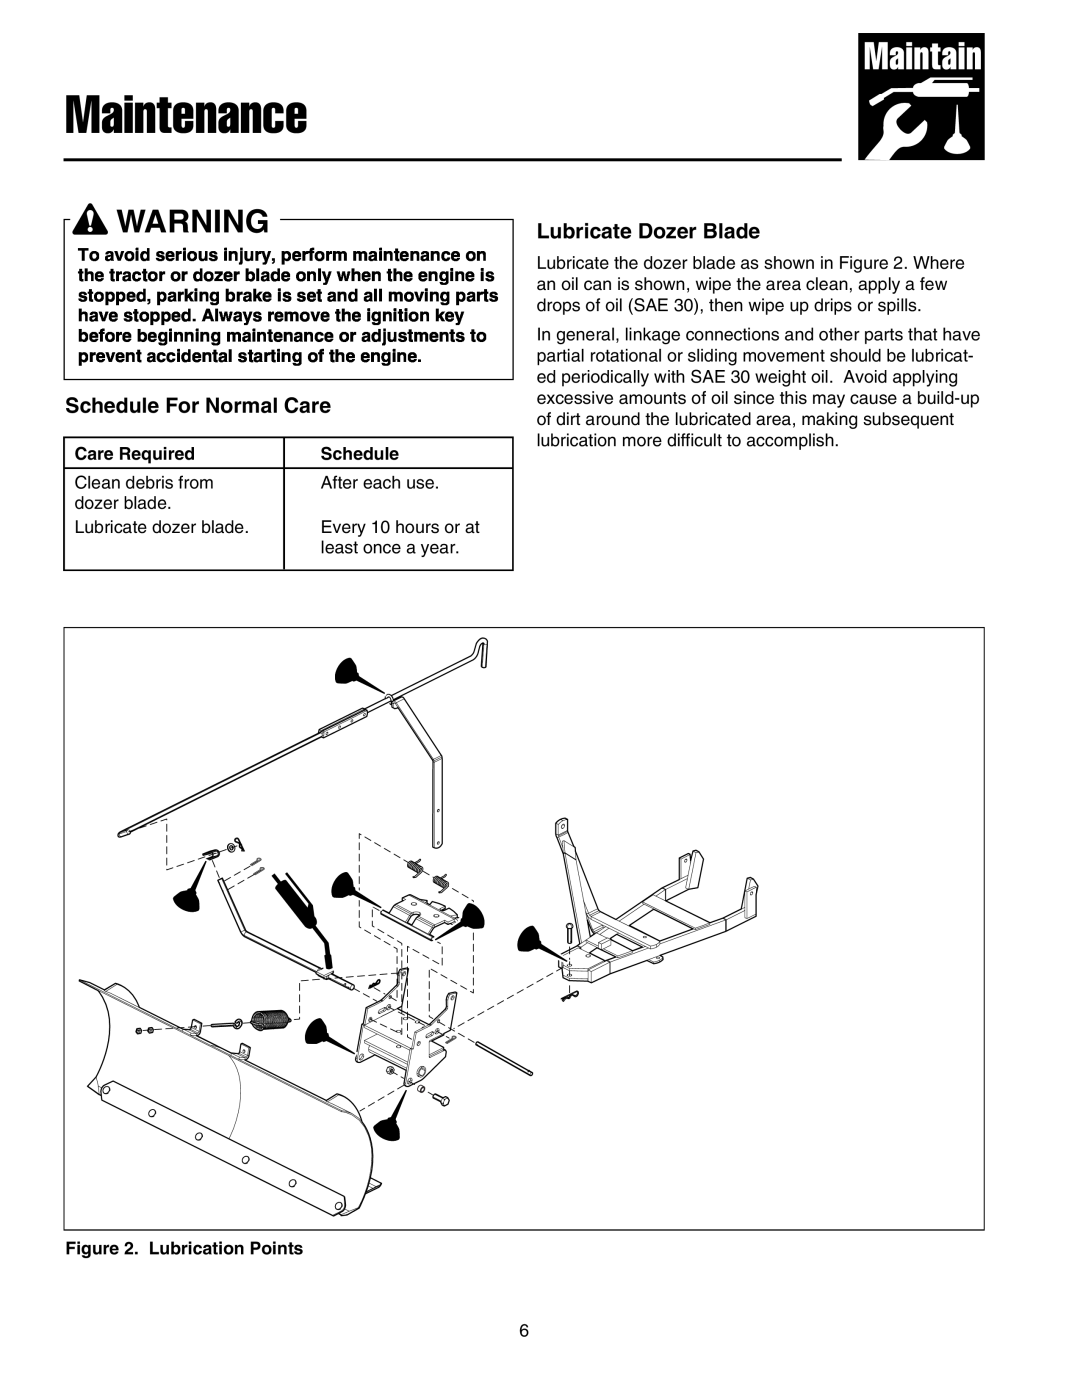 Snapper 1721303-01 manual Maintenance, Schedule For Normal Care, Lubricate Dozer Blade 